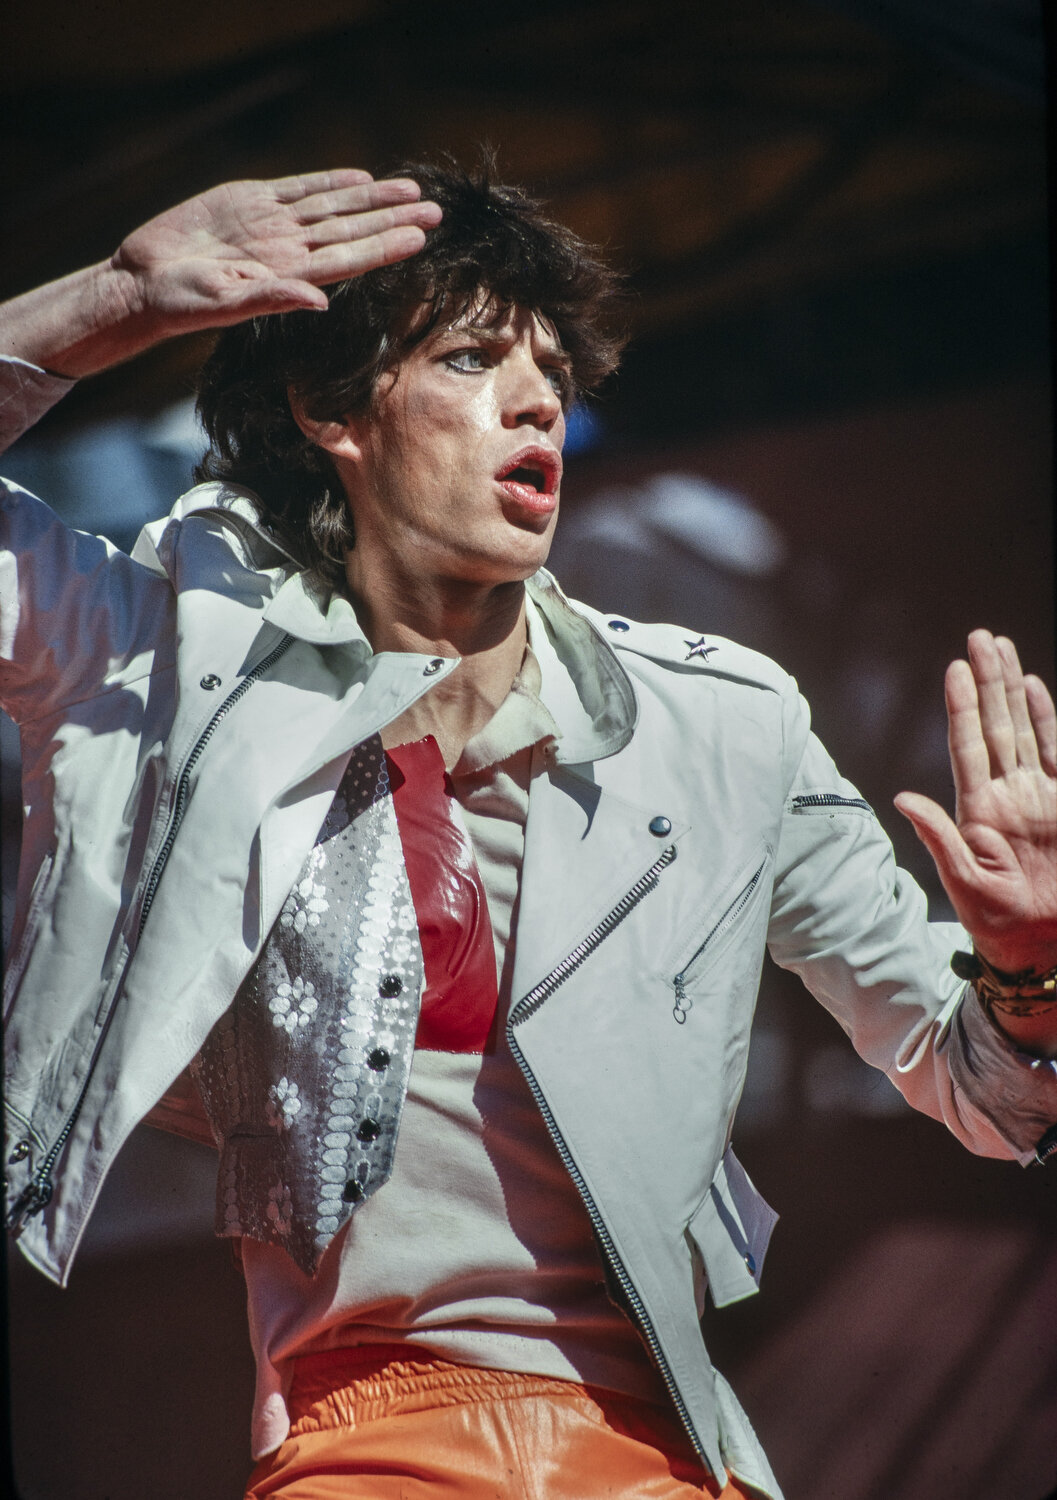  Mick Jagger of the Rolling Stones performs at the Oakland Coliseum July 26, 1978. 